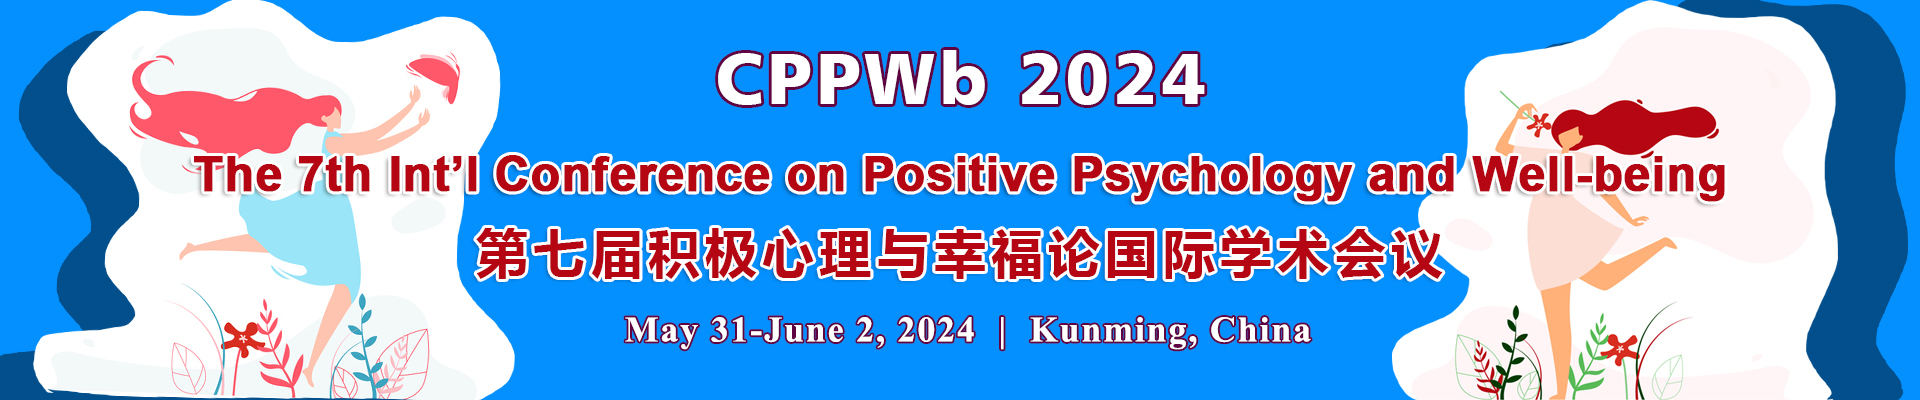 The 7th Int’l Conference on Positive Psychology and Well-being (CPPWb 2024), Kunming, Yunnan, China